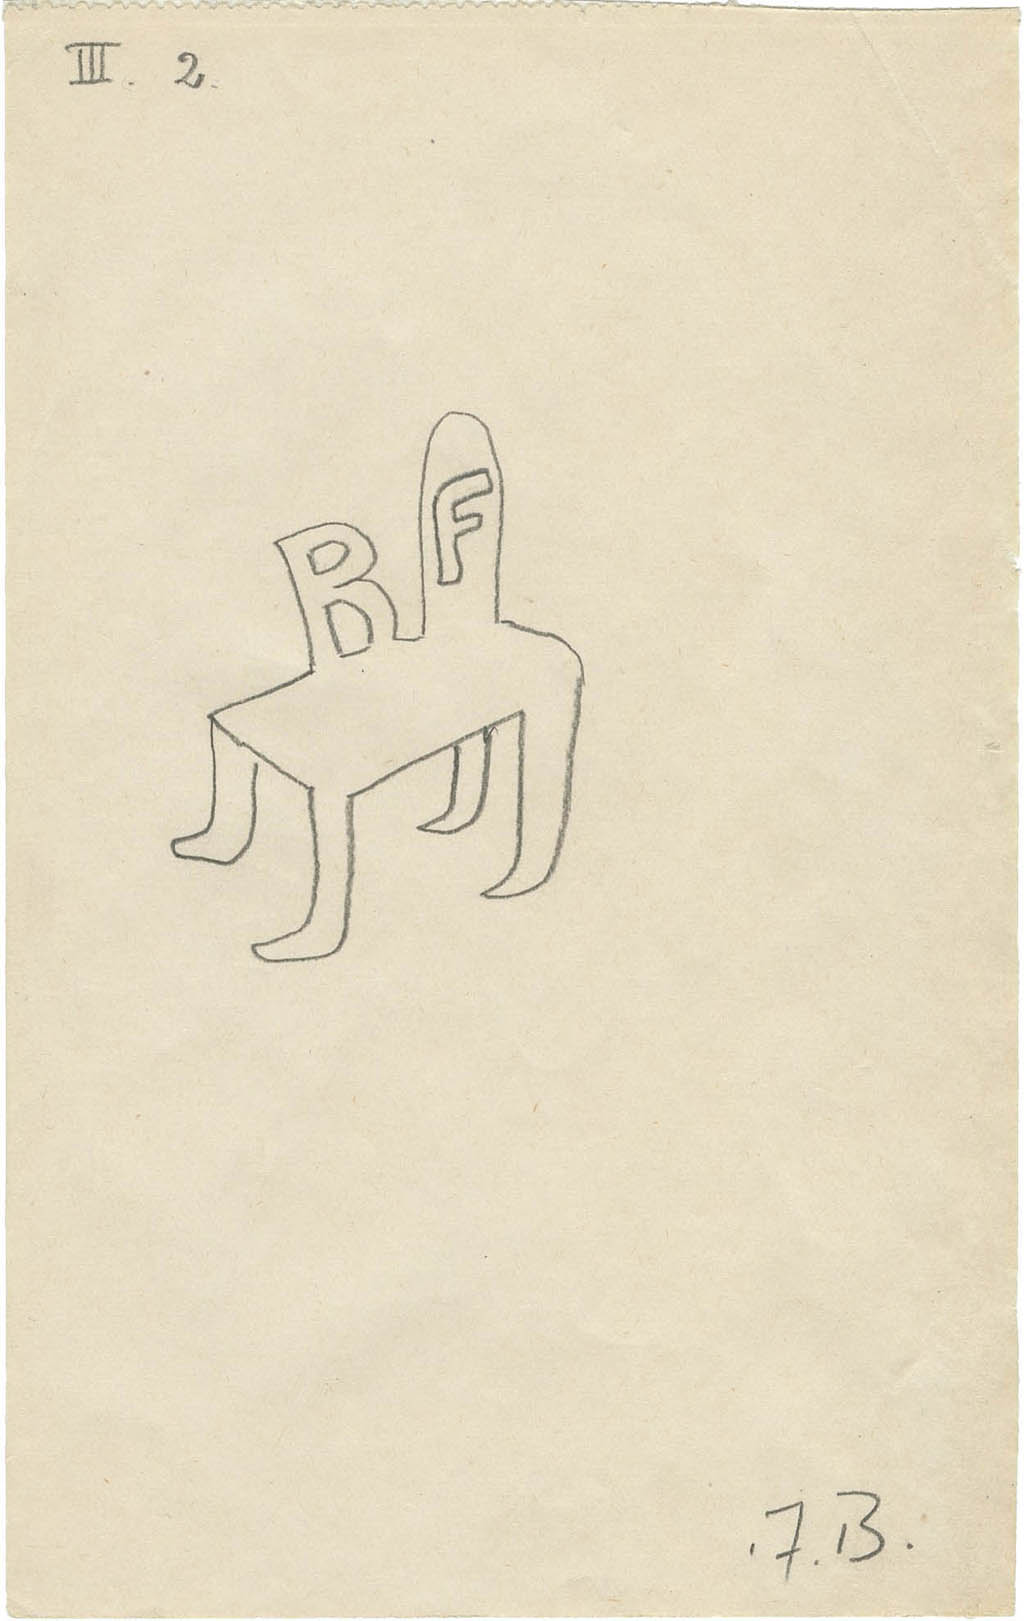 Jeu de Dessin Communique (Game of Communicated Drawing) - Andre Breton - Le Chaise RF (The Armchair RF) - c.1938 pencil and ink on six sheets of paper